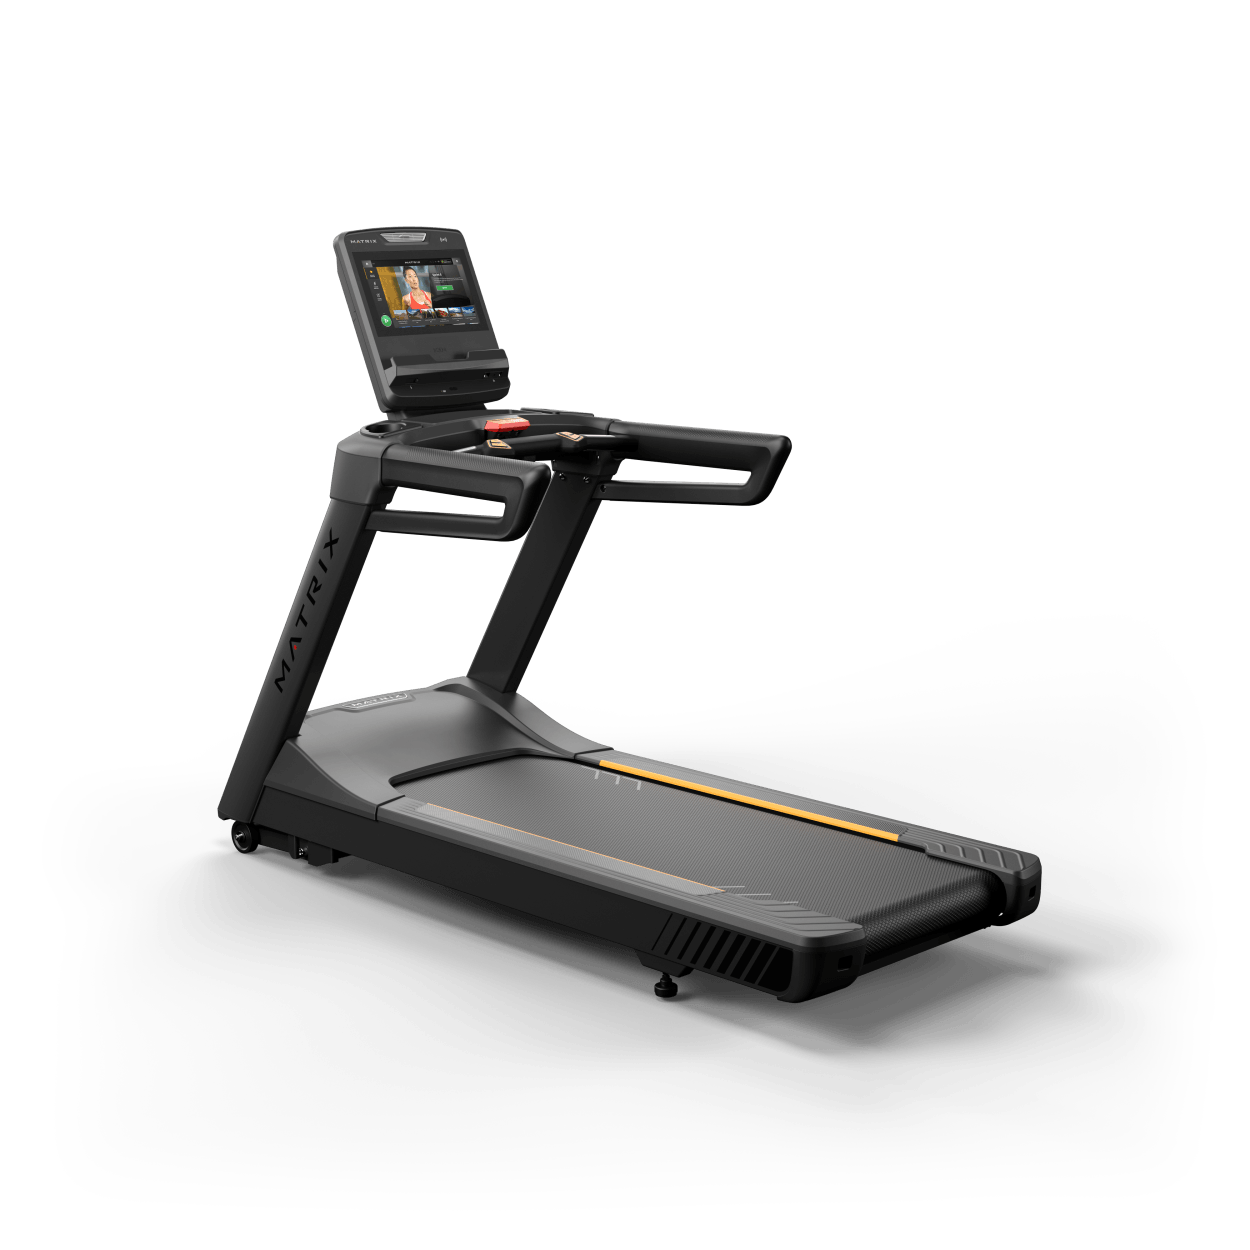 Matrix Fitness Endurance Treadmill with Touch Console full view | Fitness Experience